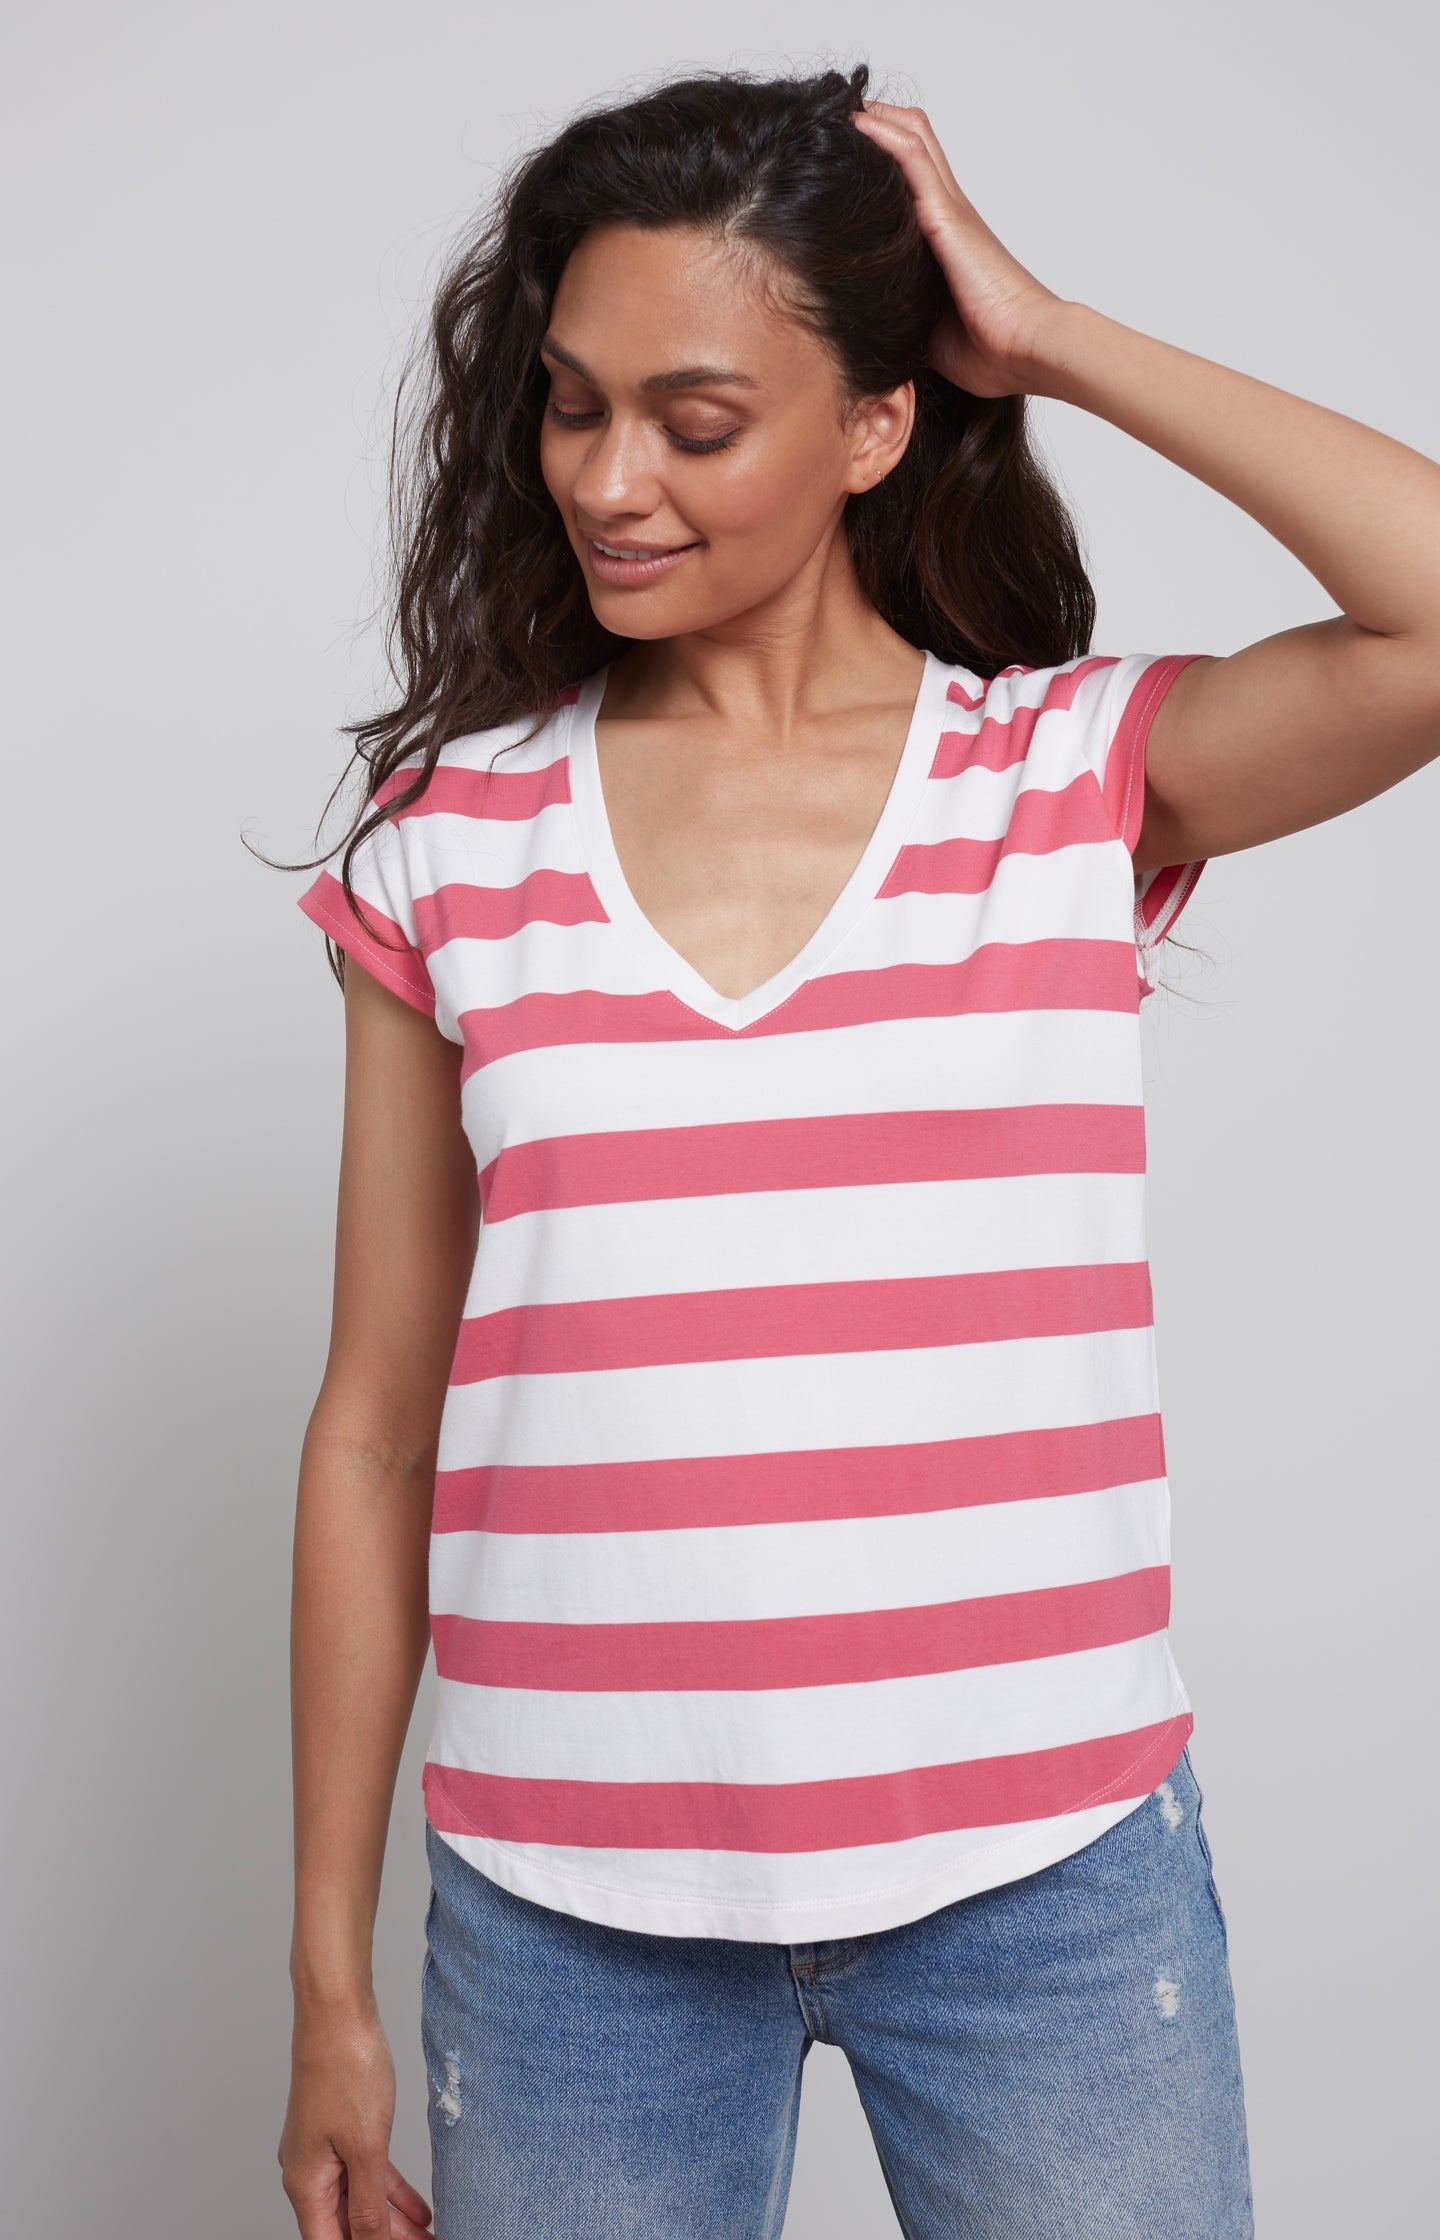 Striped T-shirt with V-neck and cap sleeves in regular fit